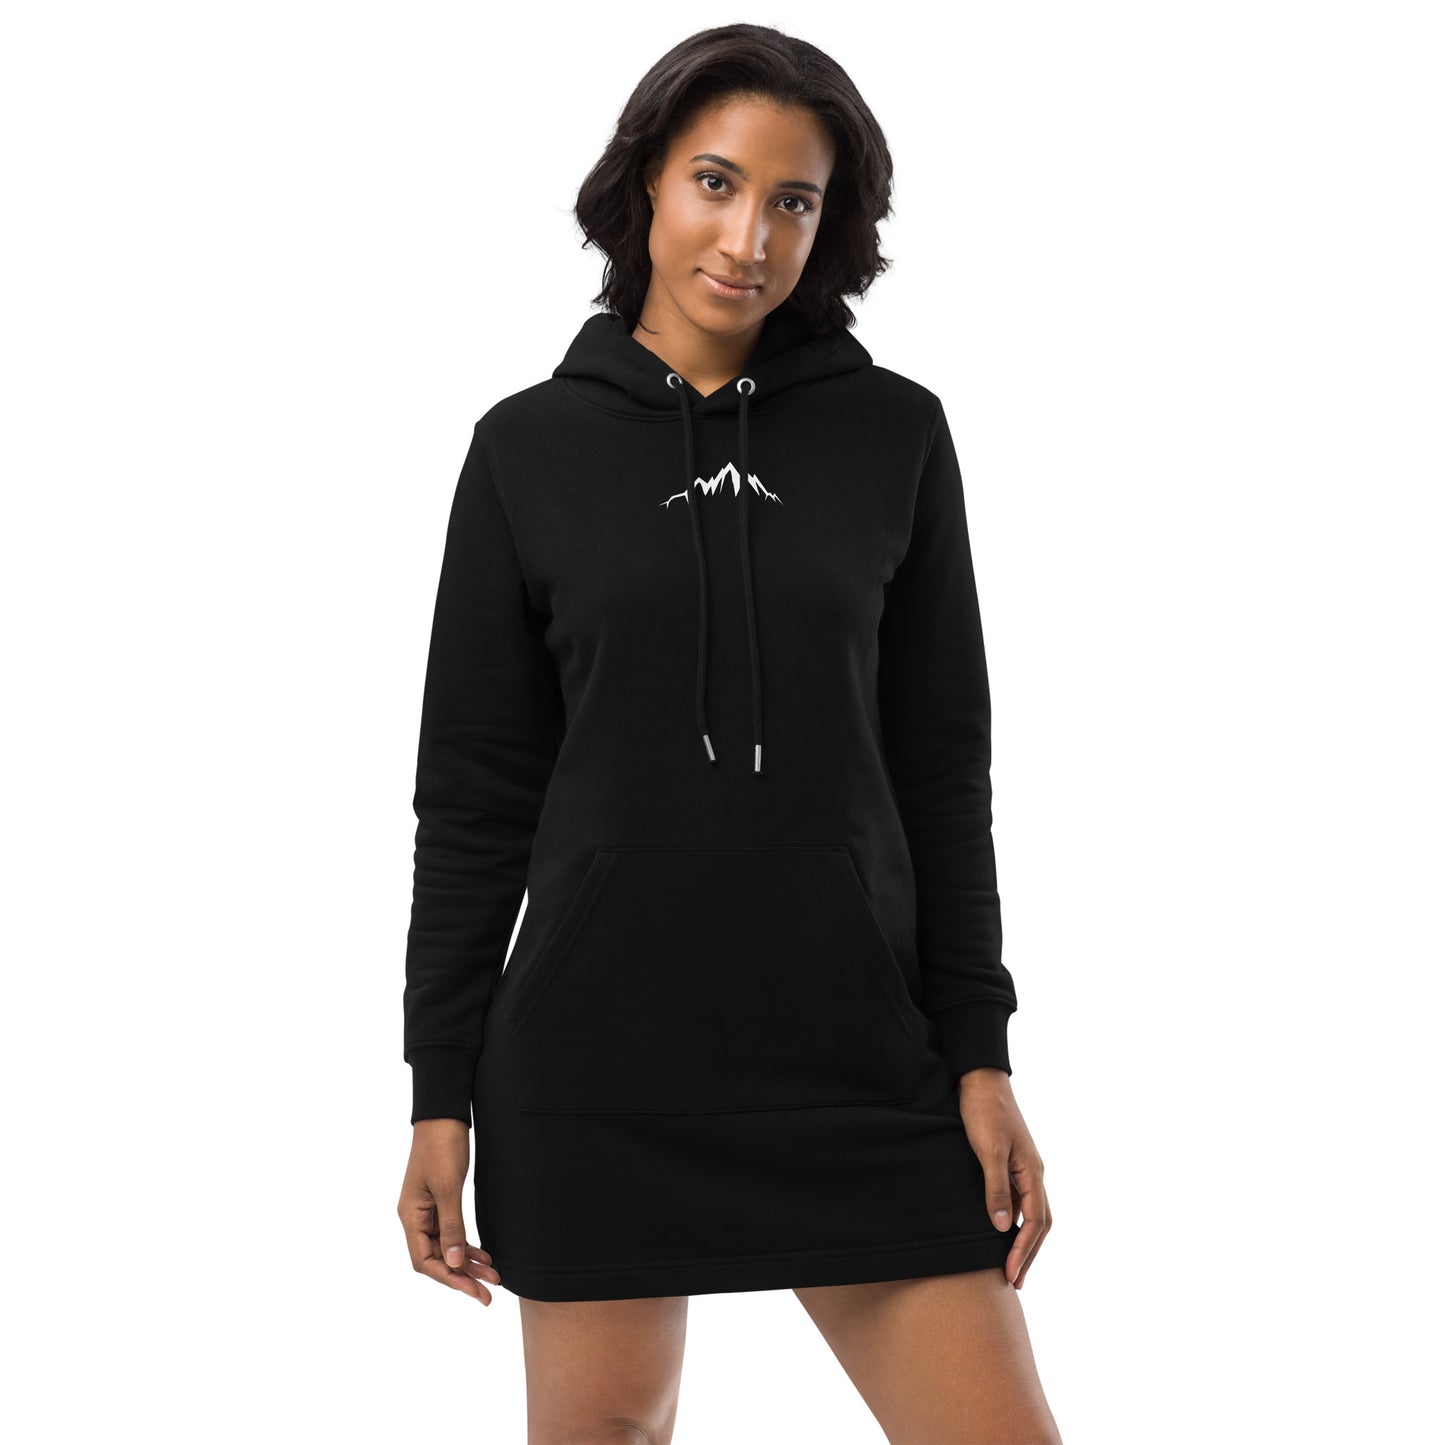 hoodie dress for womens outdoor gym sports or hiking adventure